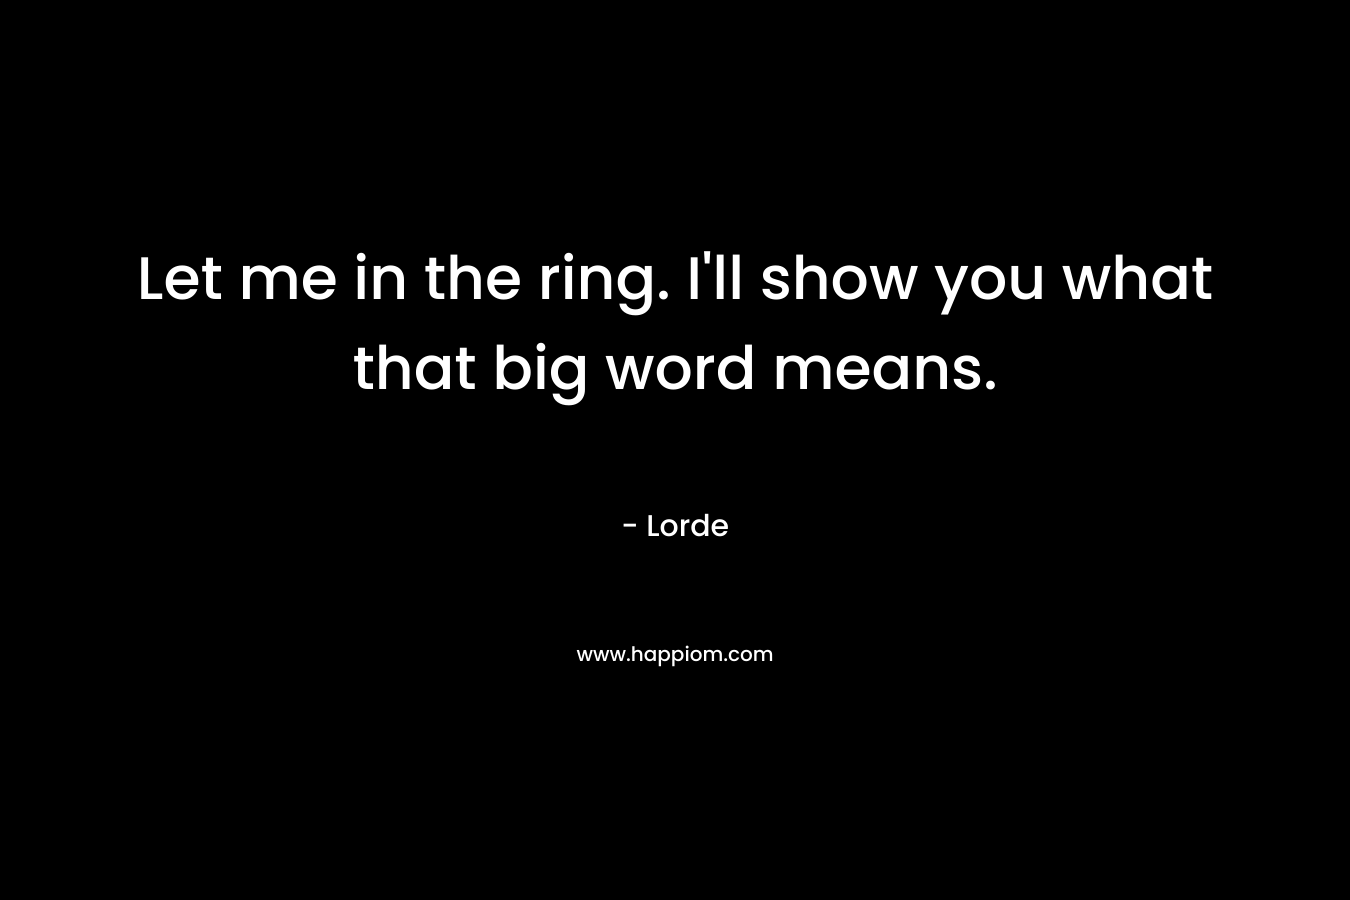 Let me in the ring. I'll show you what that big word means.